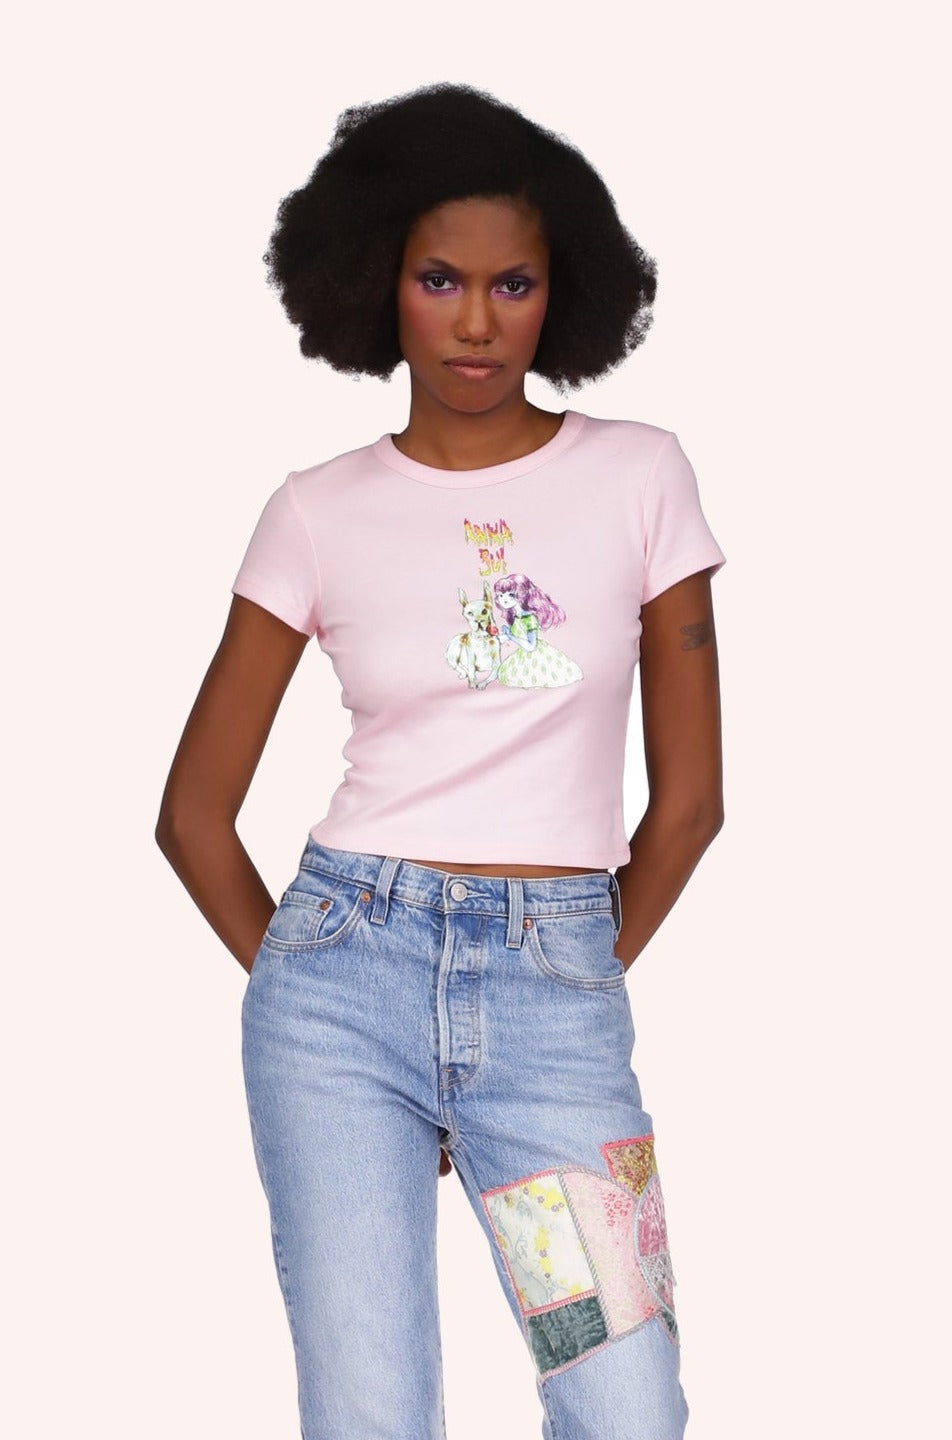 Micro Ribbed Baby Tee Light Pink, Short-sleeved, above the hips, Anna Sui logo above a stylized little girl with a large white dog.